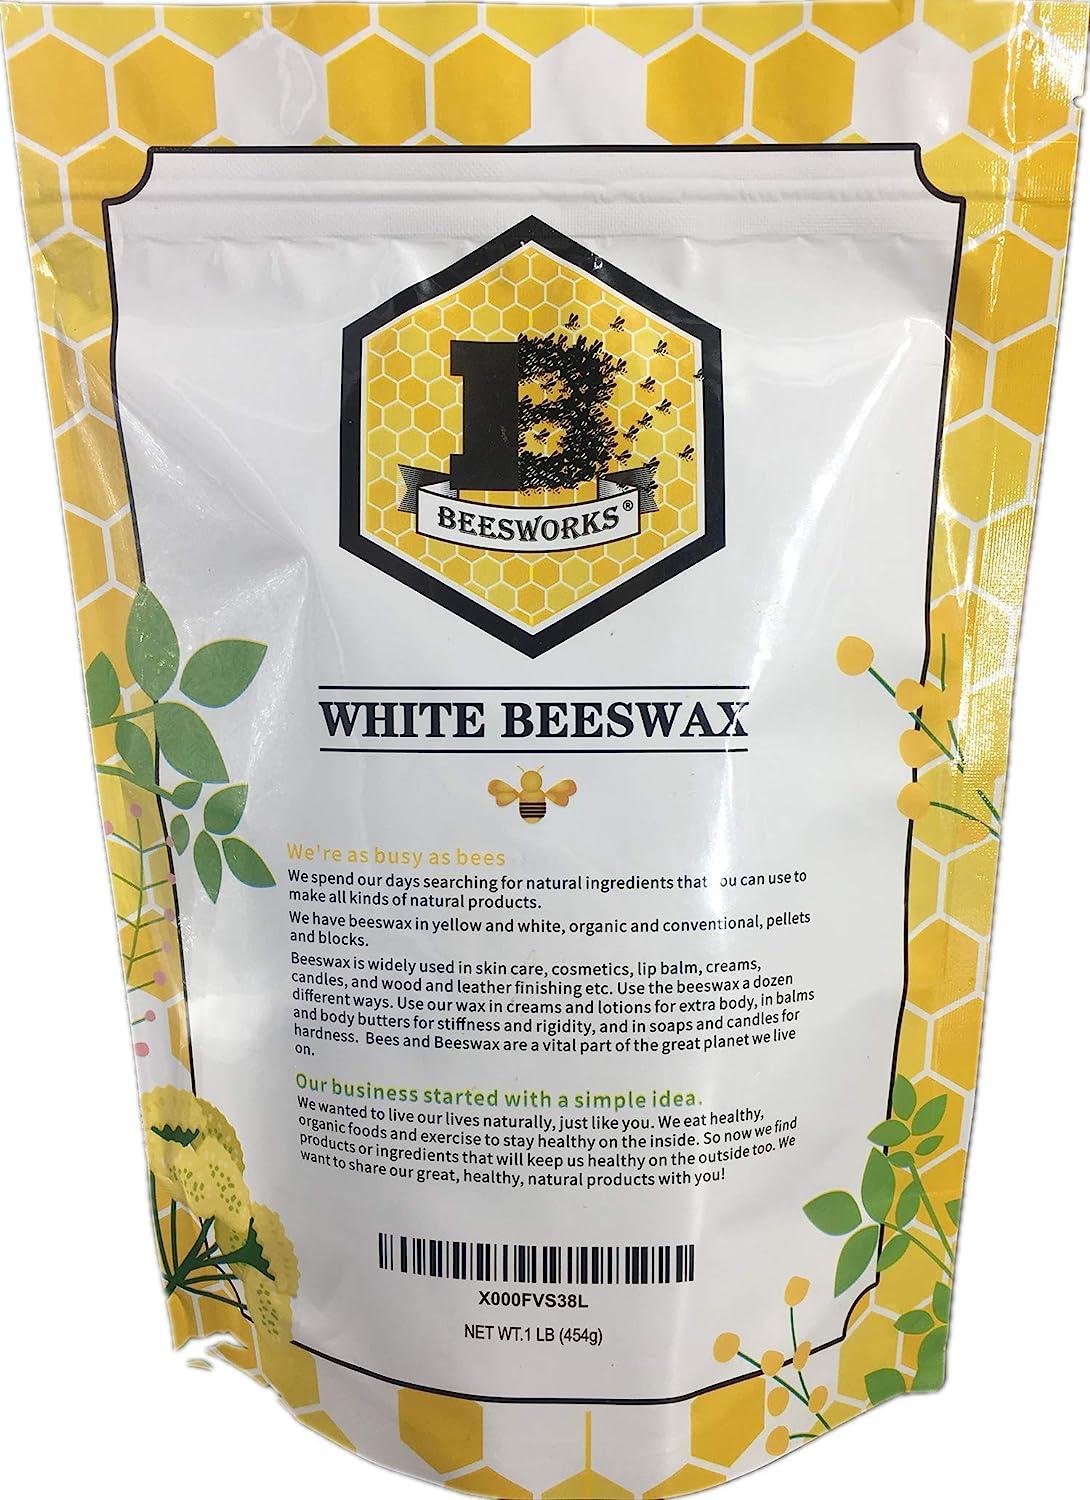 White Beeswax Organic Pastilles Pure 3 LB